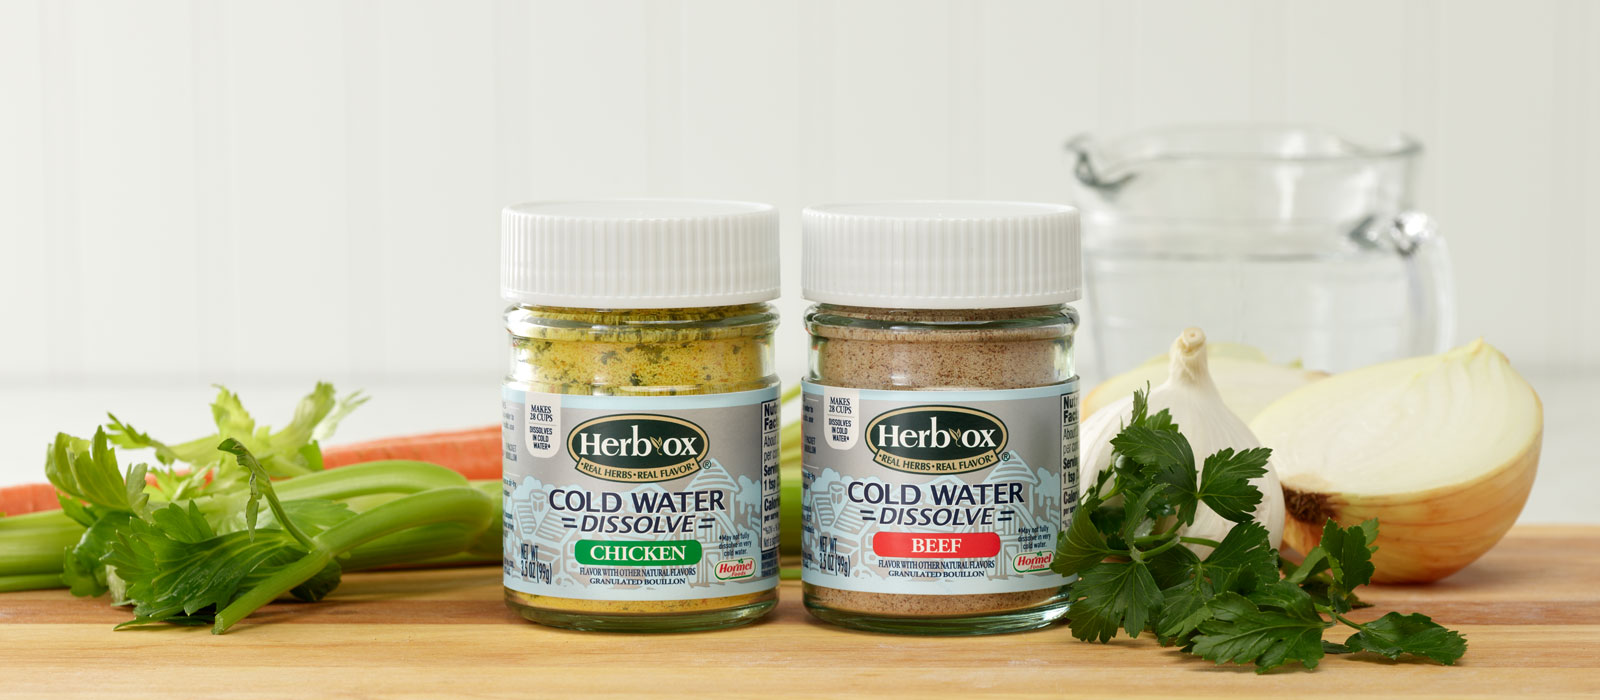 Herb-Ox Cold Dissolve jars on wood board with veggies